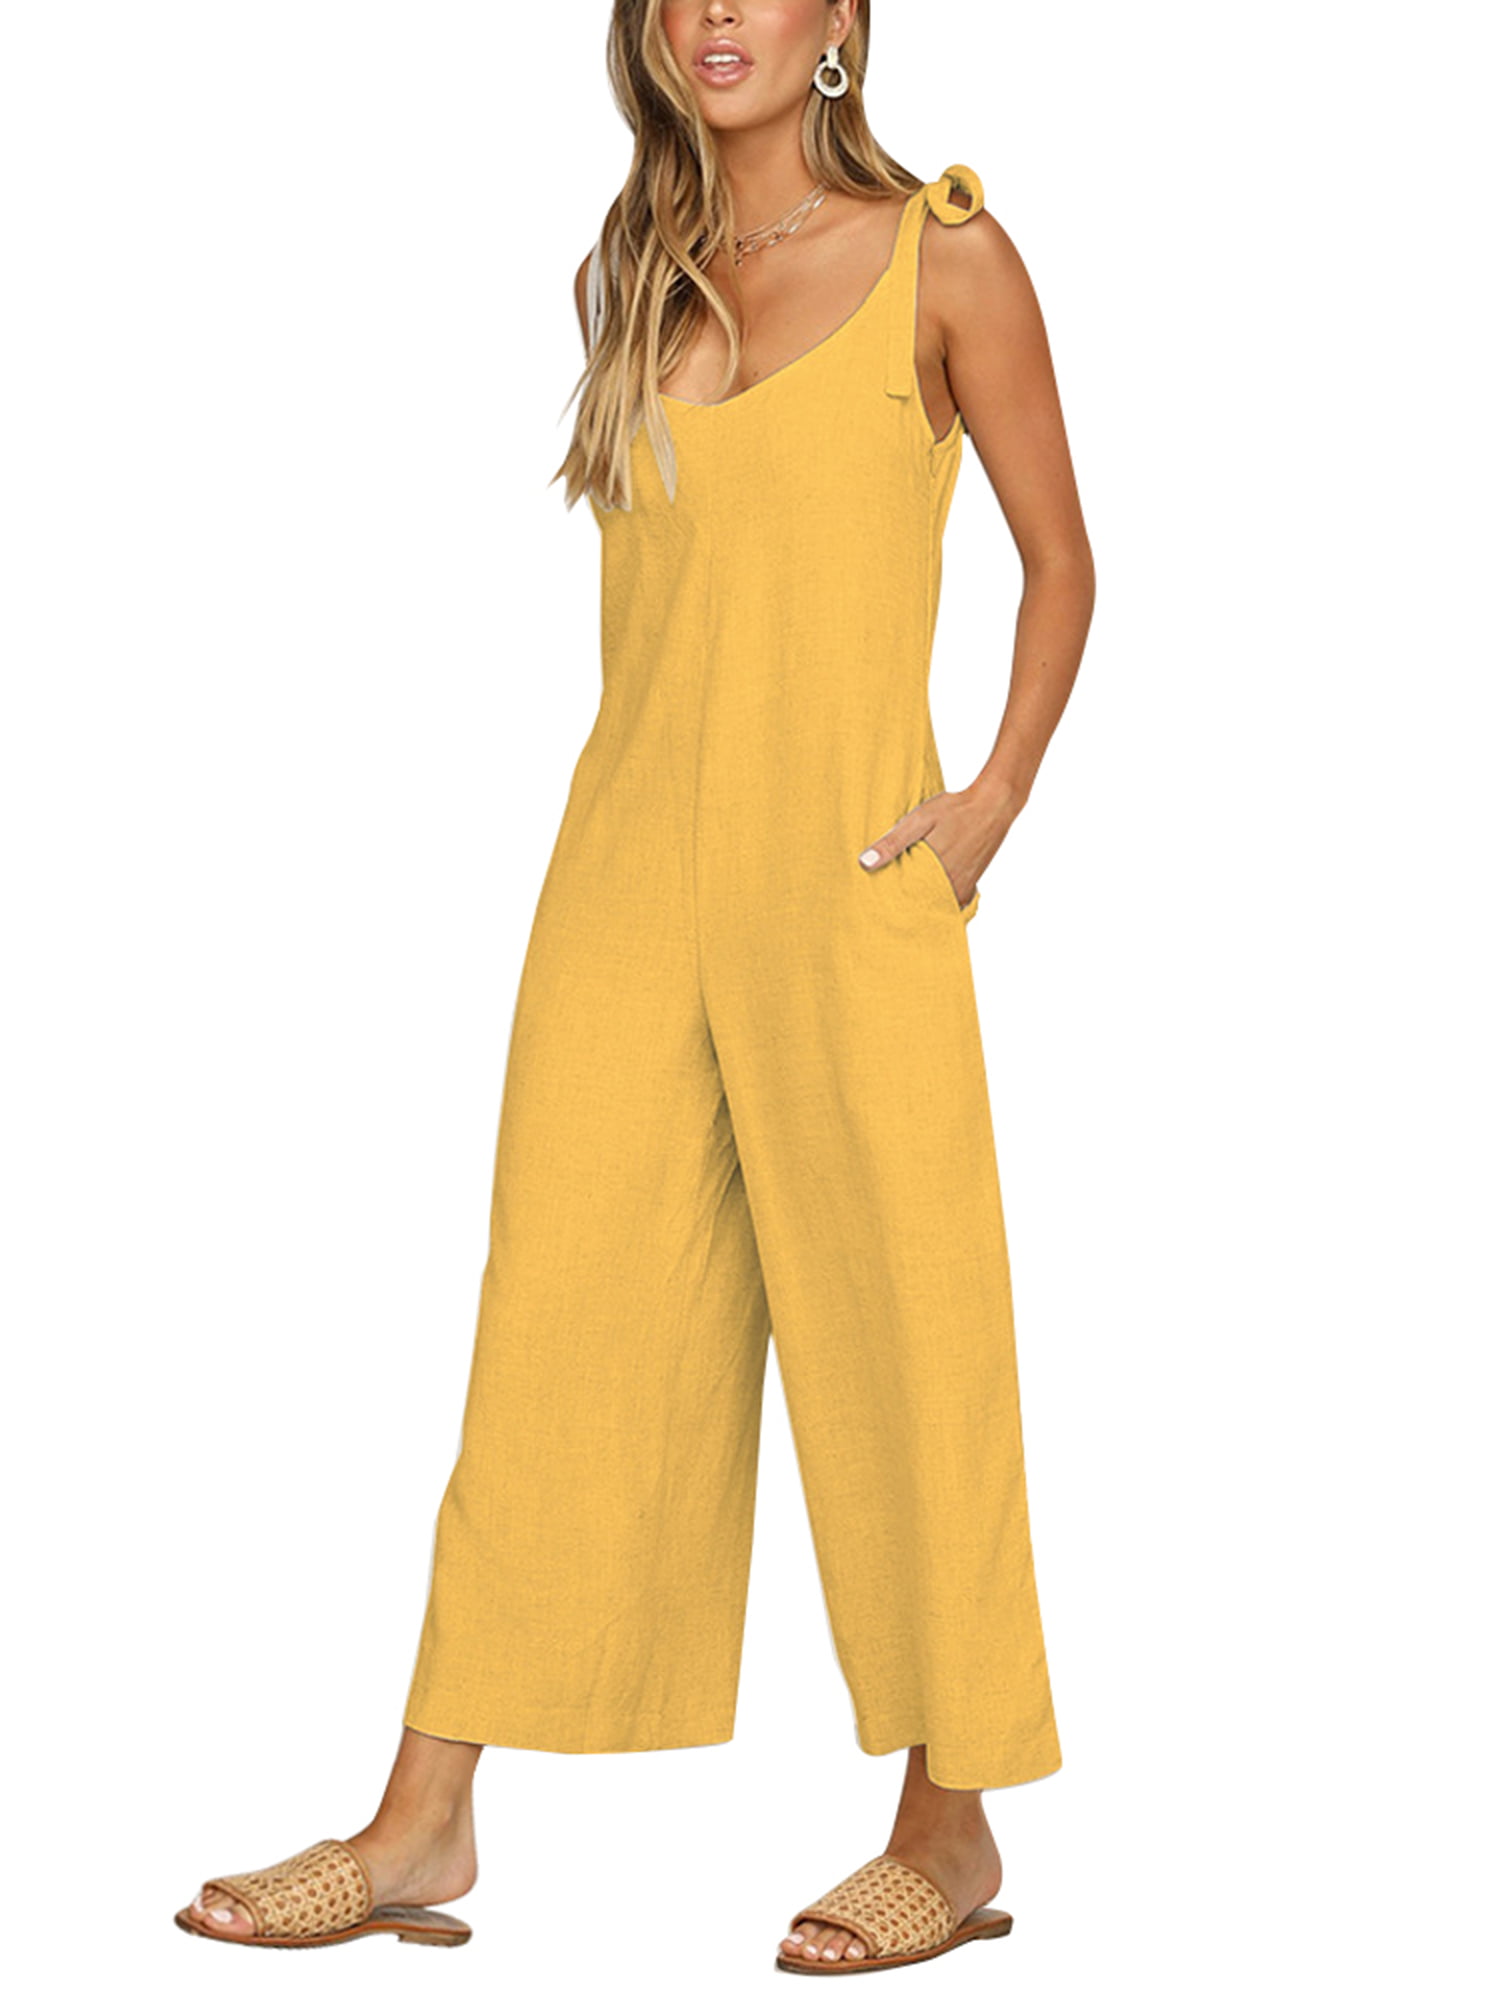 Runstarshow Womens Casual Wide Leg Strappy Bib Rompers Pants Sleeveless Baggy Jumpsuit Dungarees with Pockets